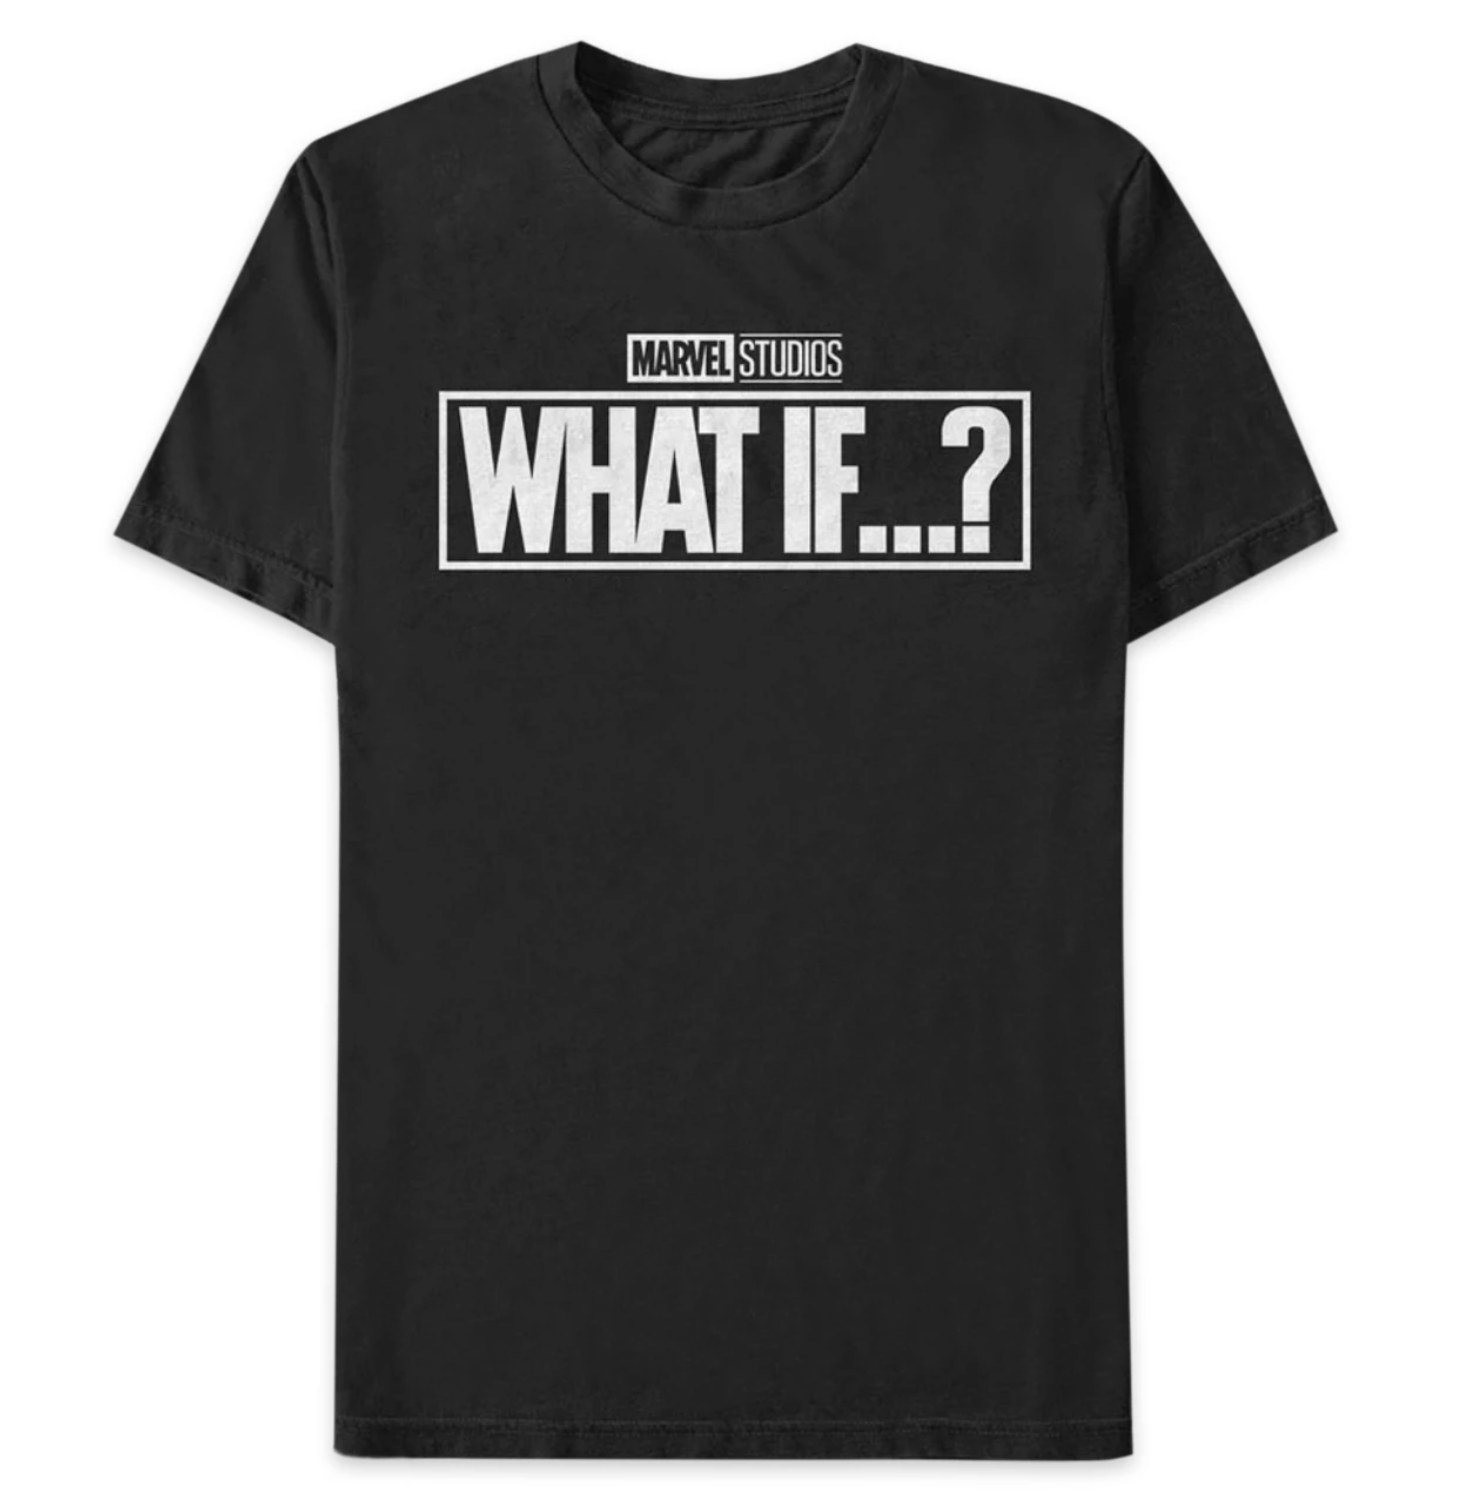 the black t-shirt with a white &quot;what if...?&quot; logo